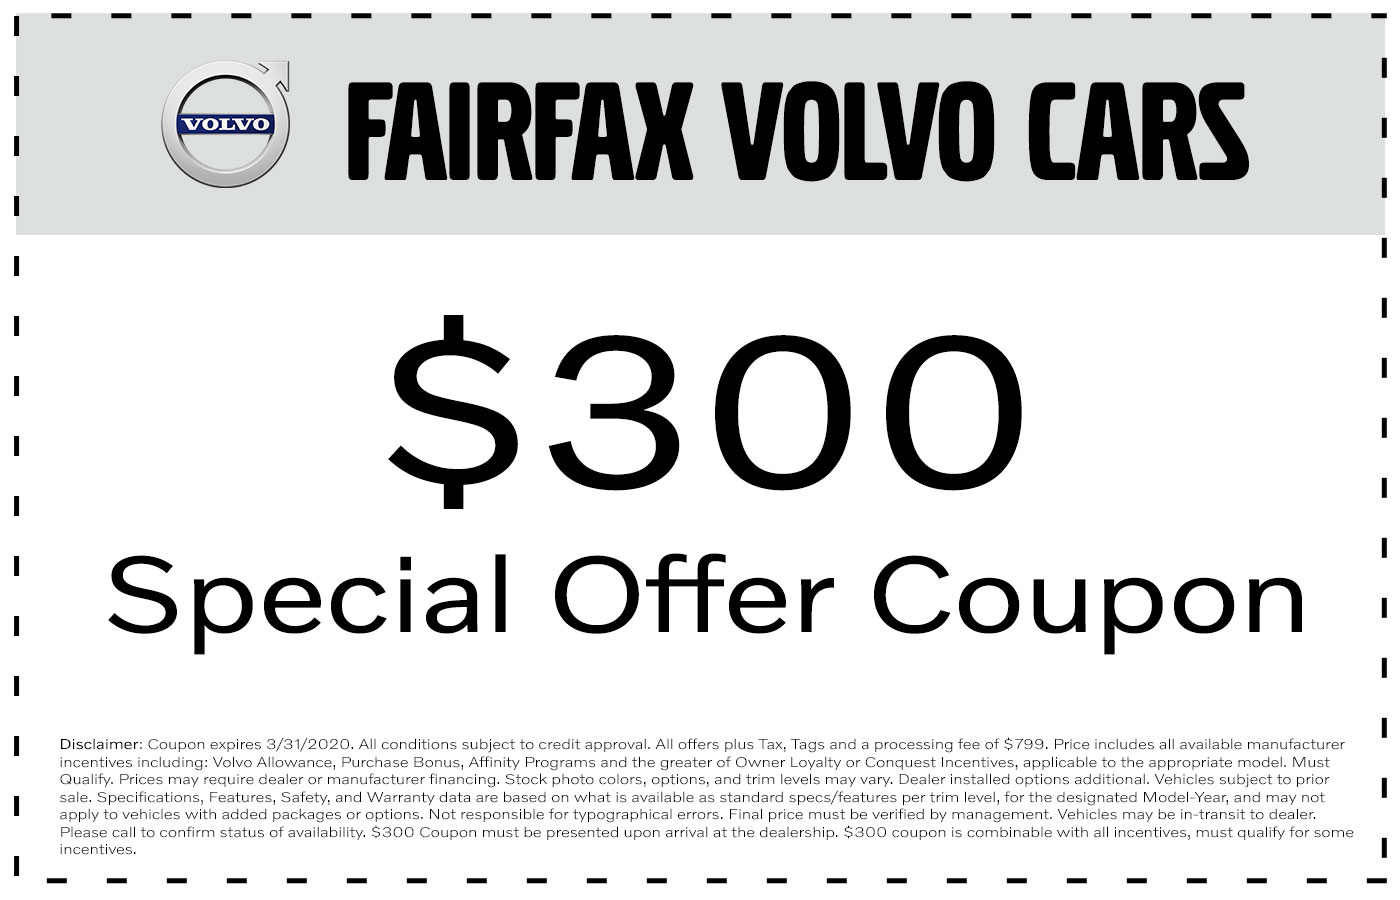 Special Offer Email Coupon Fairfax Volvo Cars